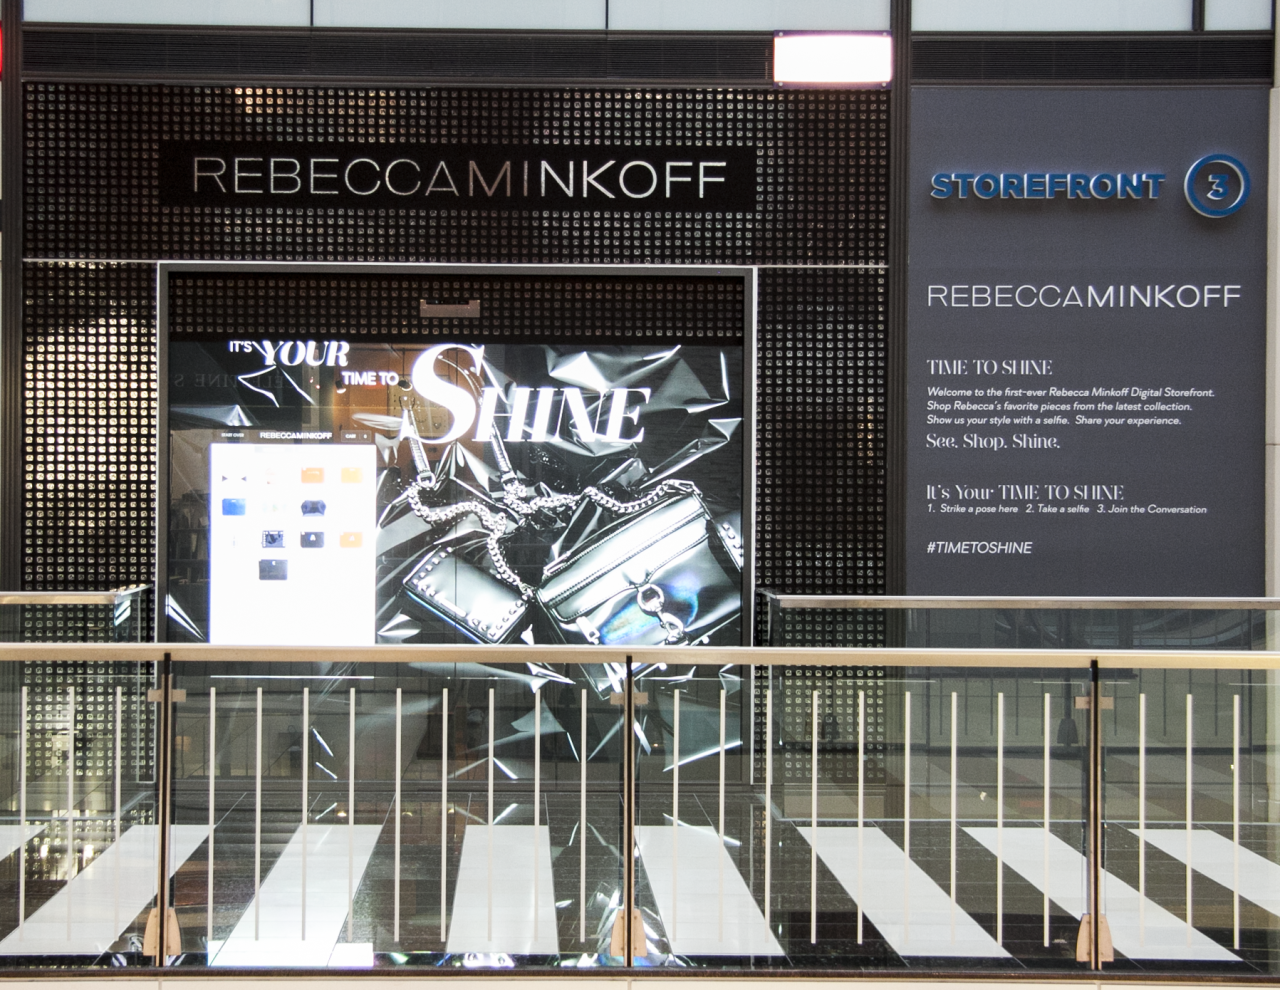 Fashion brand Rebecca Minkoff is also involved in the project at Westfield. By combining virtual shopping with bricks and mortar, shoppers get to see their products in enormous detail before purchasing.